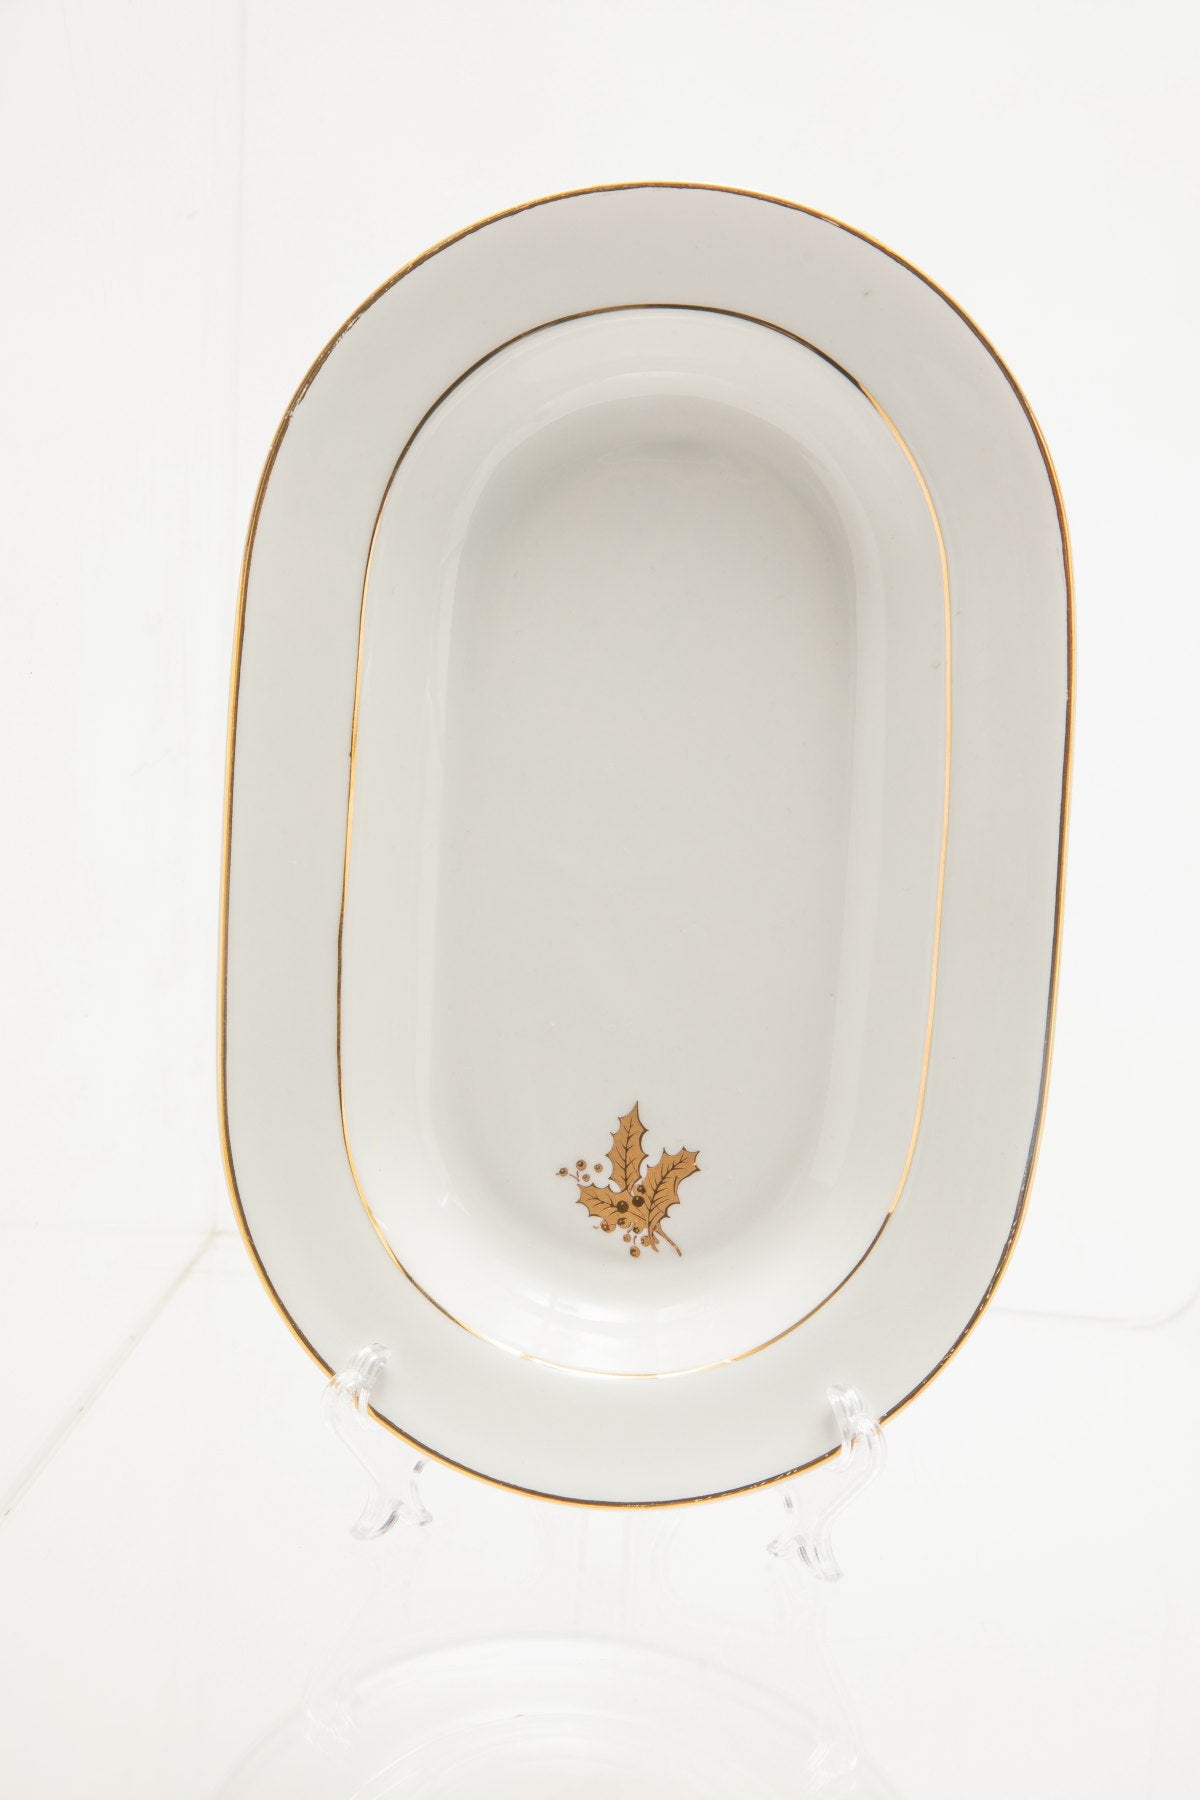 Complete Bavaria porcelain service with gold leaf decoration from the 1960s